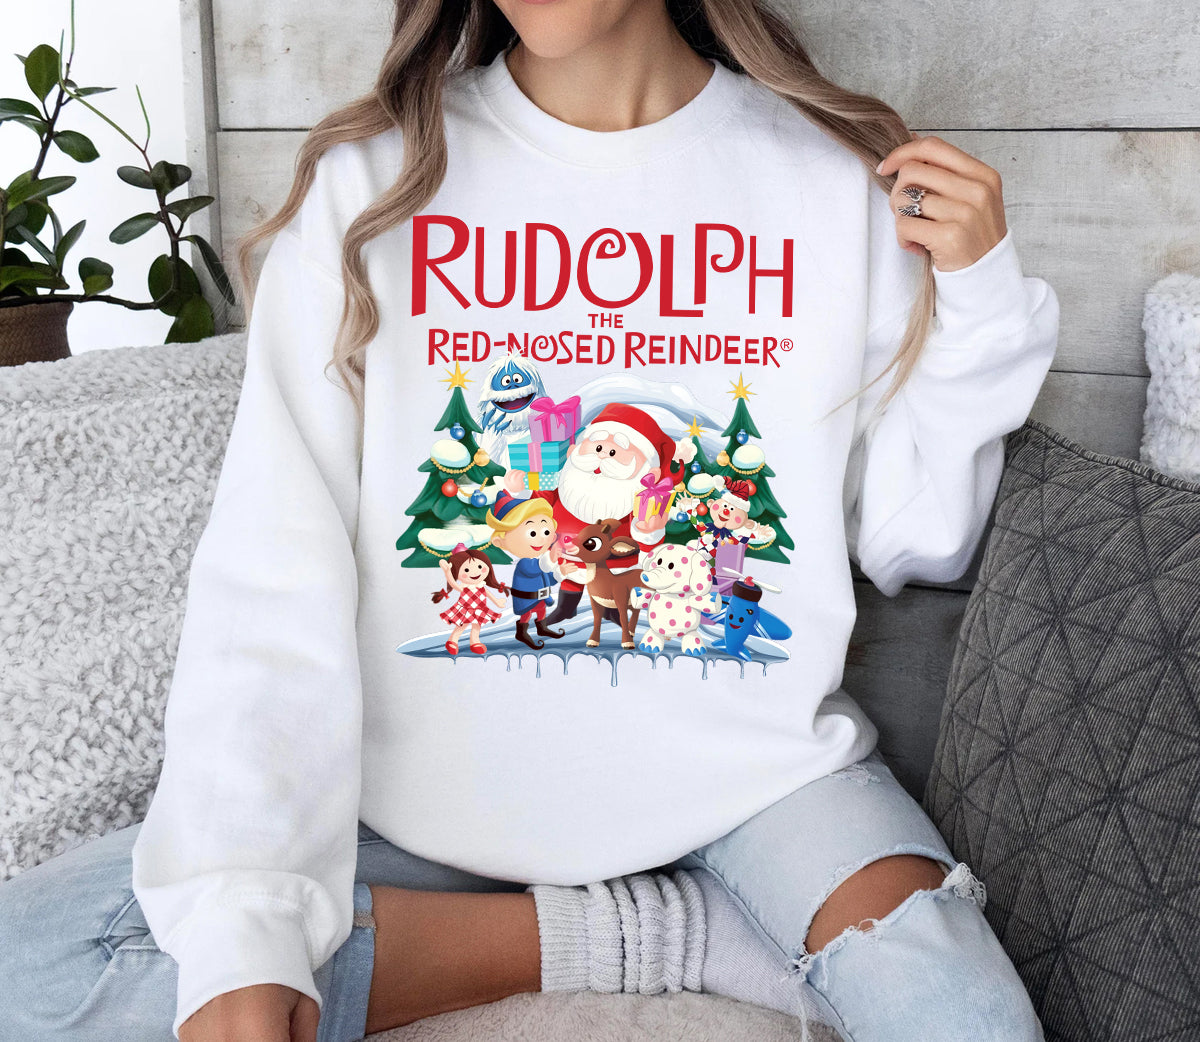 Rudolph the Red-Nosed Reindeer Shirt